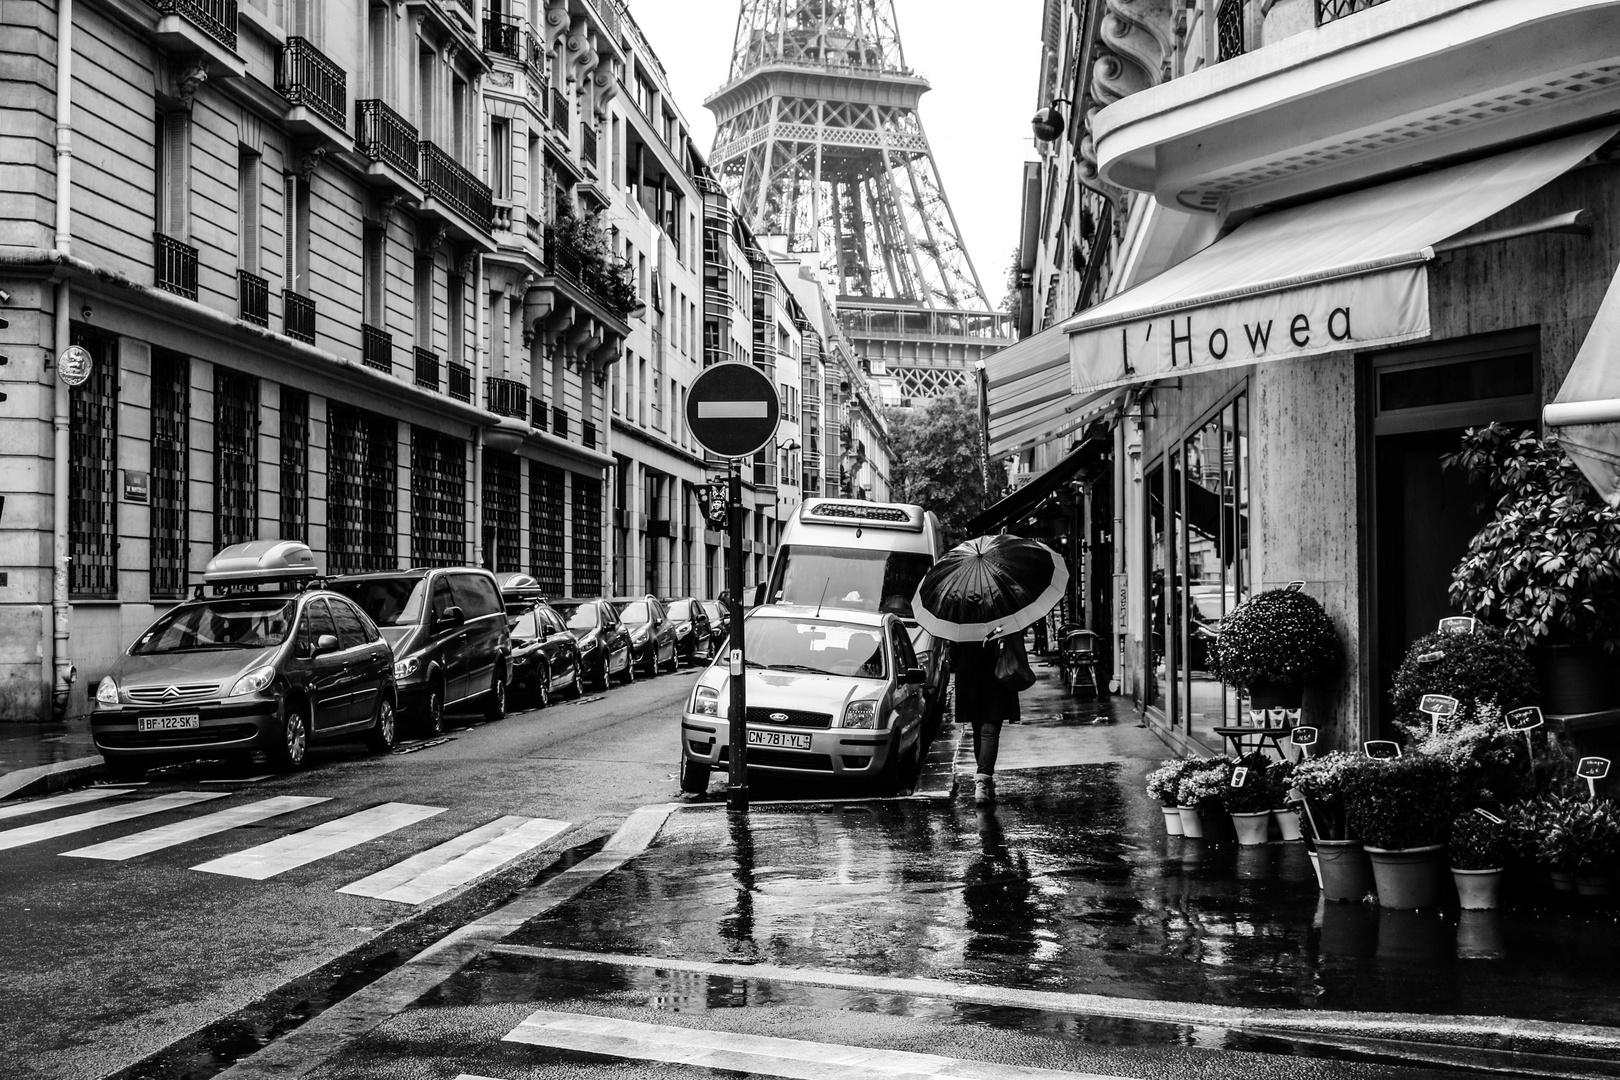 City of Love or City of Loneliness